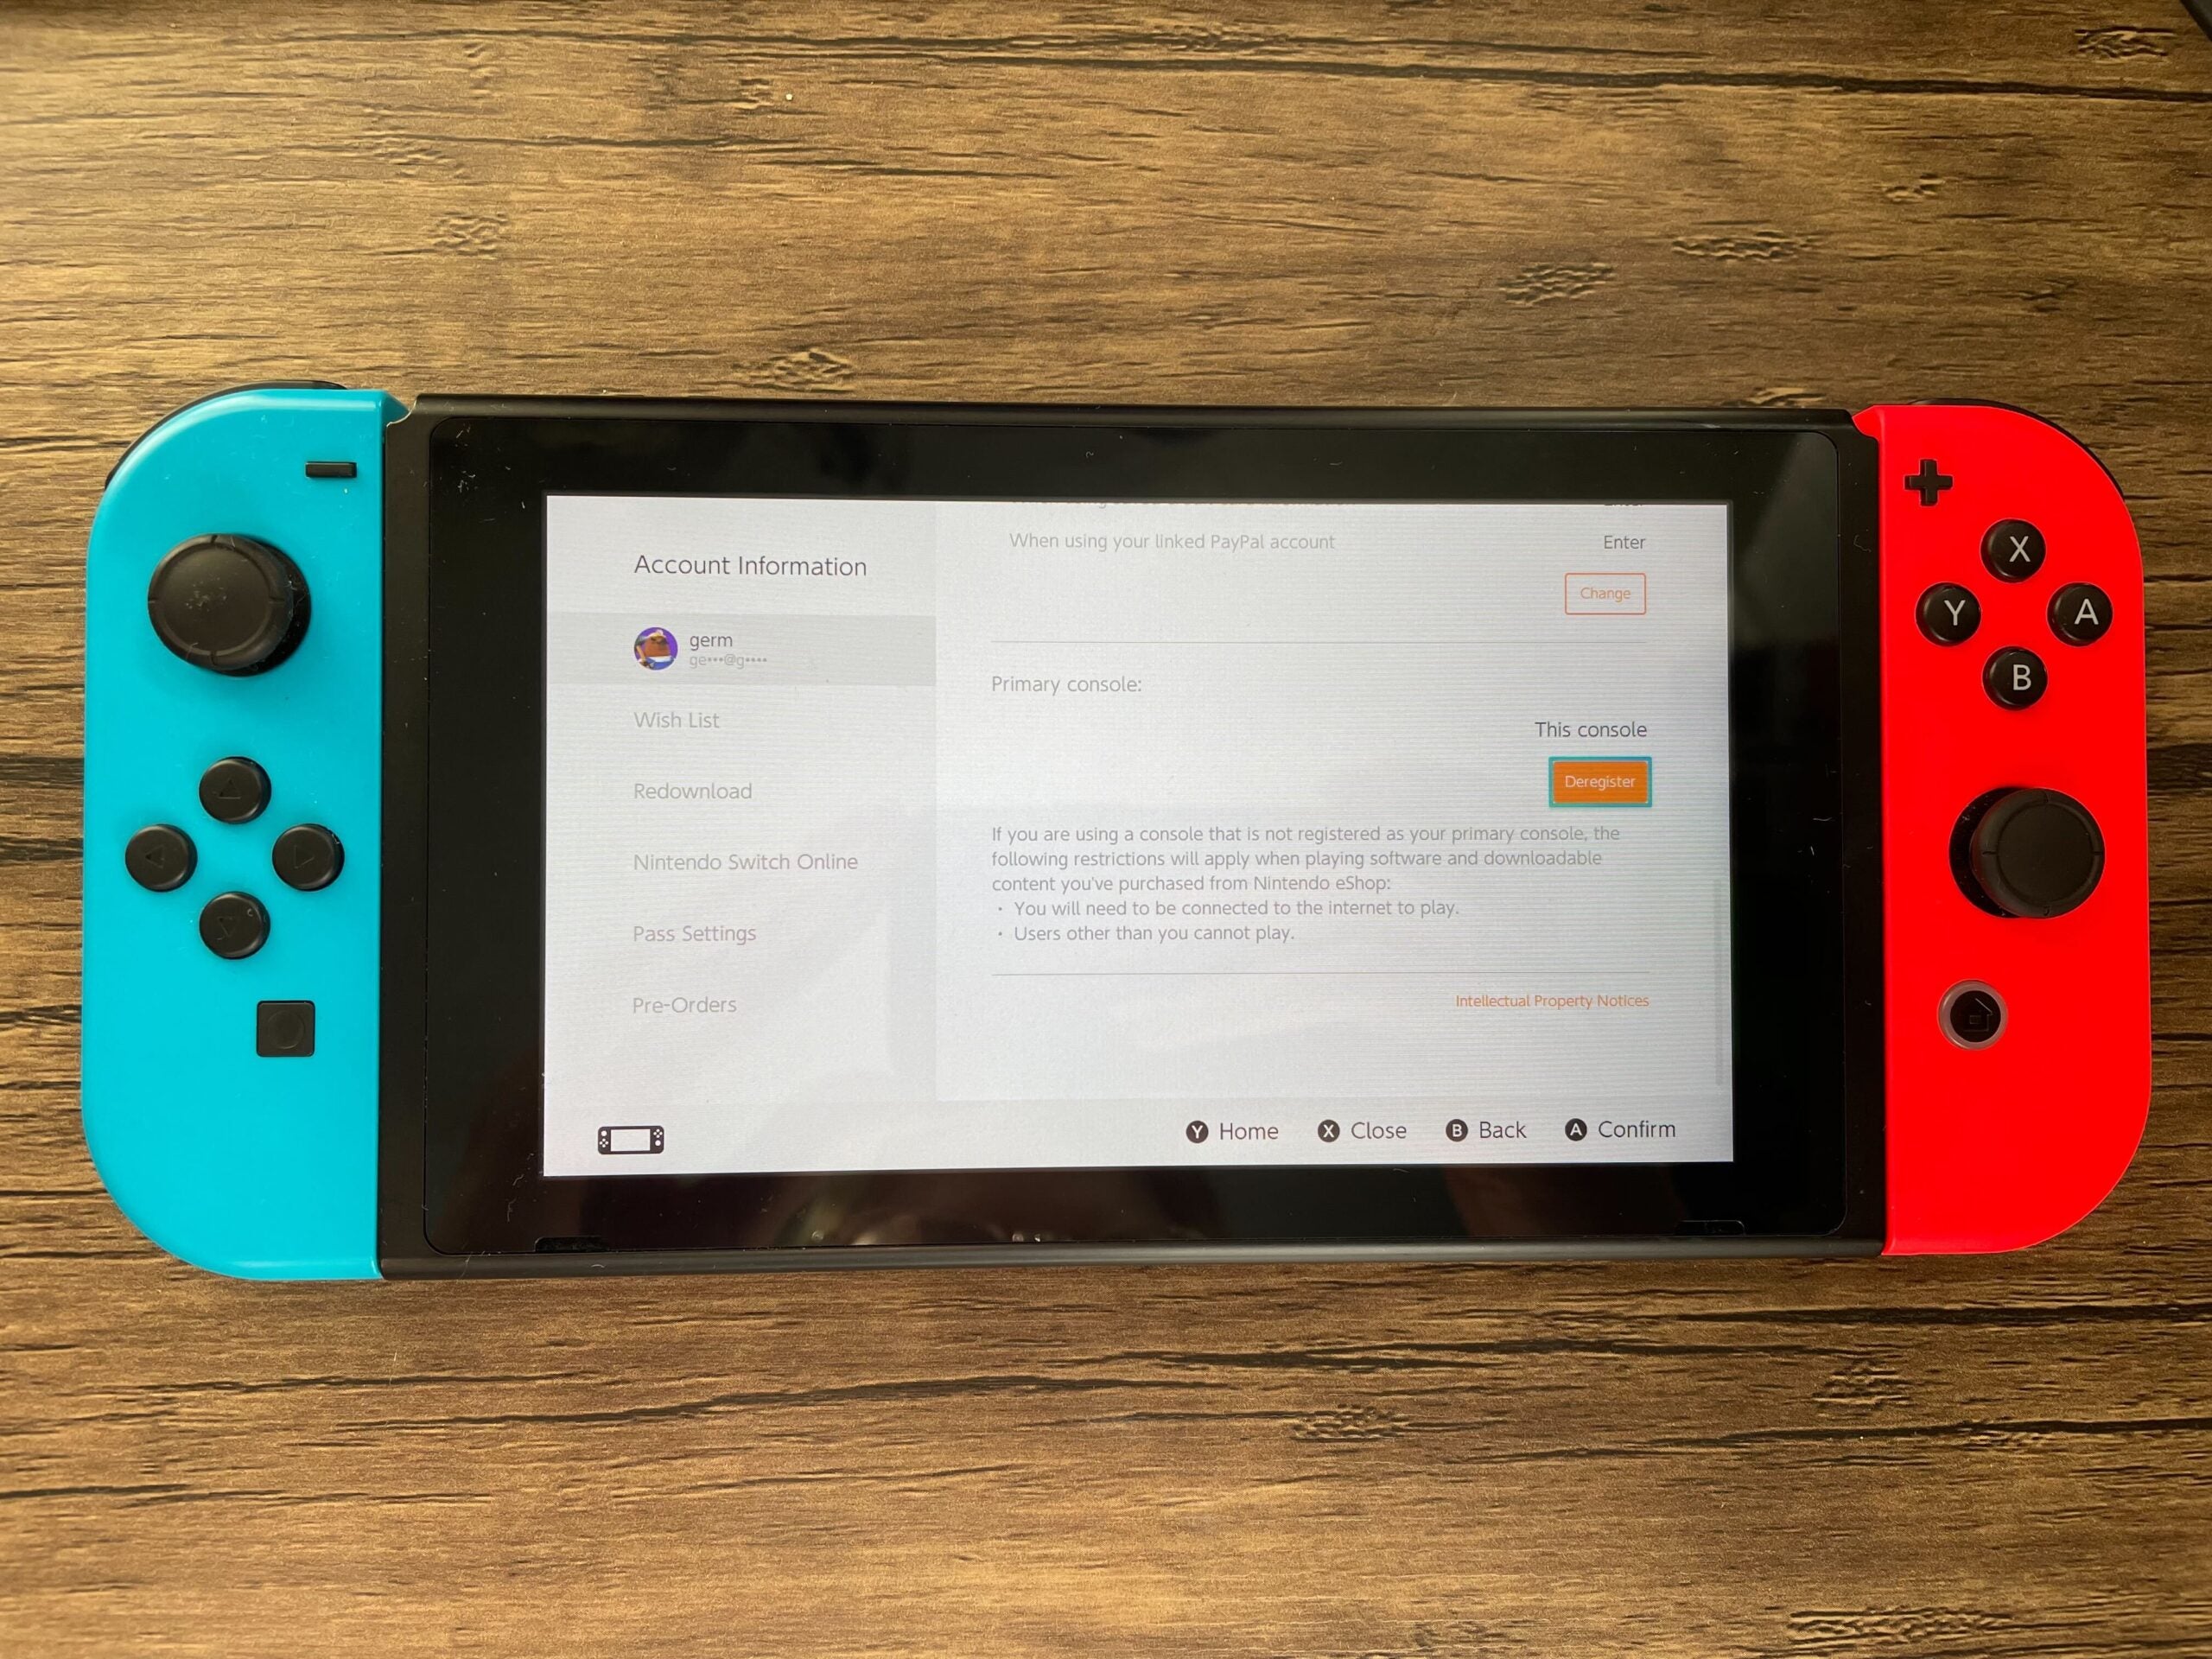 Deregister your account on Switch